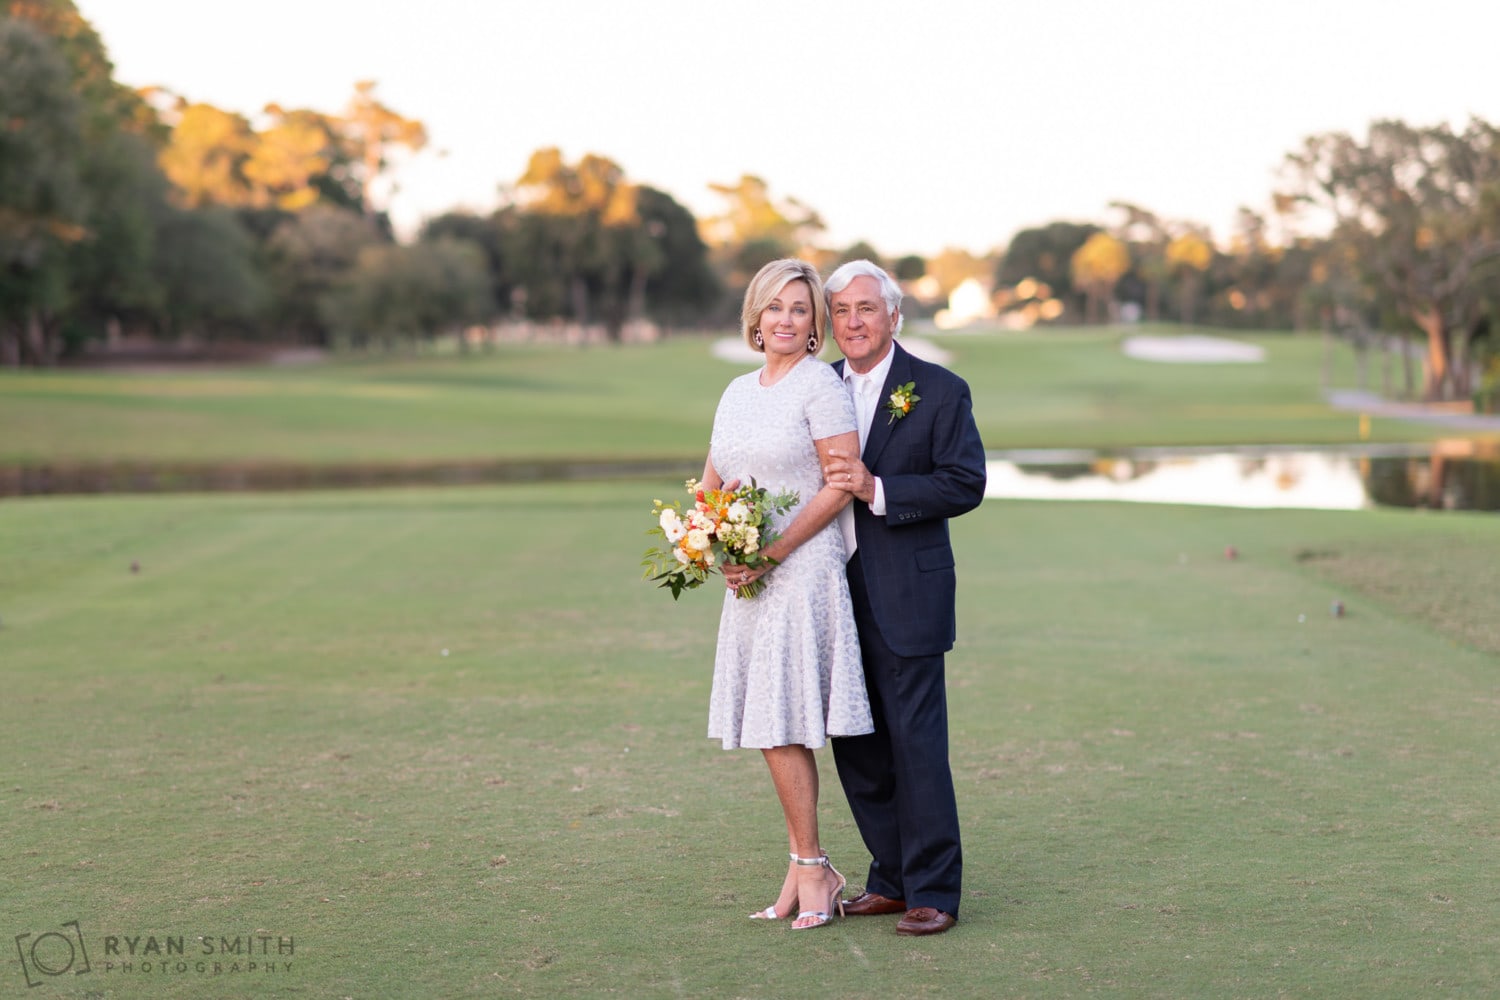 Groom standing behind the bride on the golf course - Dunes Golf and Beach Club - Myrtle Beach